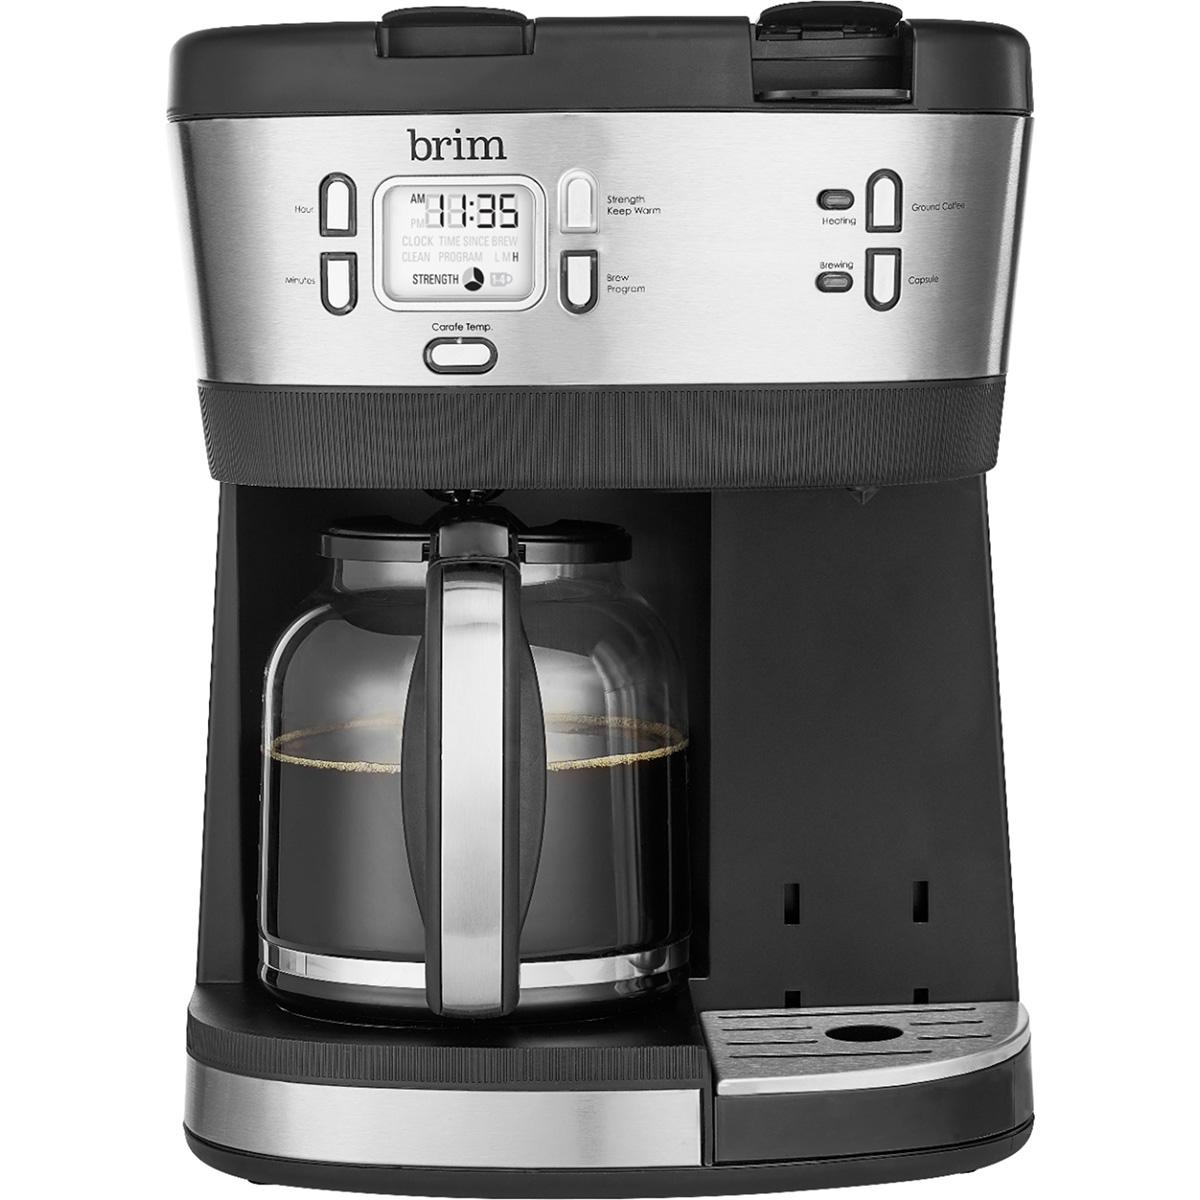 Brim Triple Brew 12-Cup Coffee Maker for $59.99 Shipped